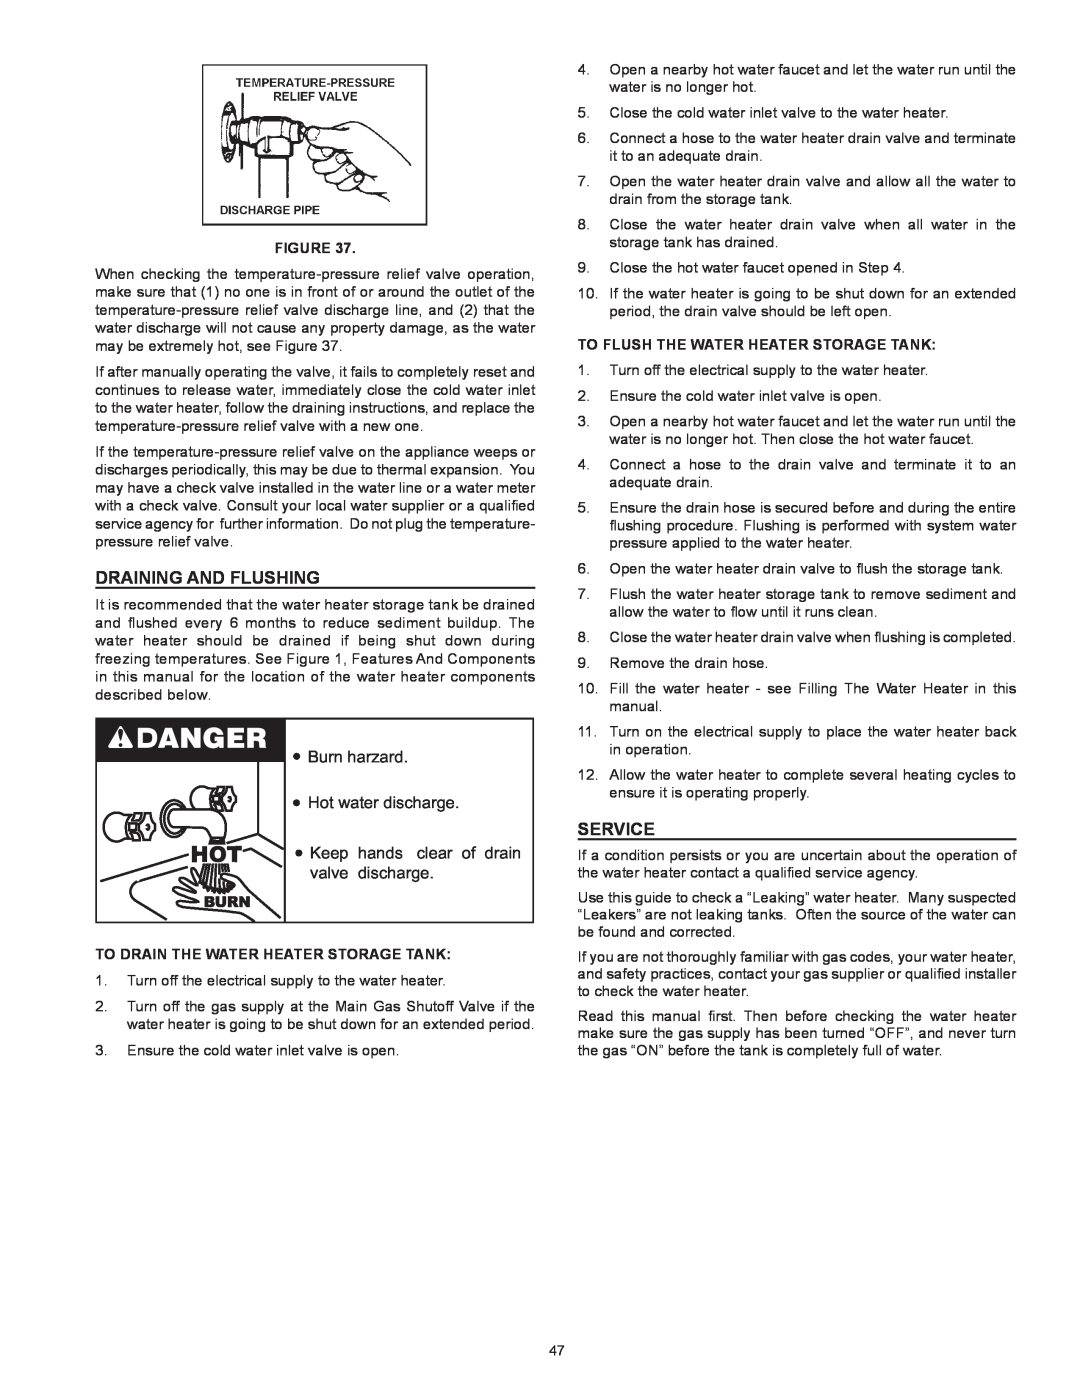 American Water Heater VG6250T100 instruction manual Draining and Flushing, Service, Burn harzard Hot water discharge 